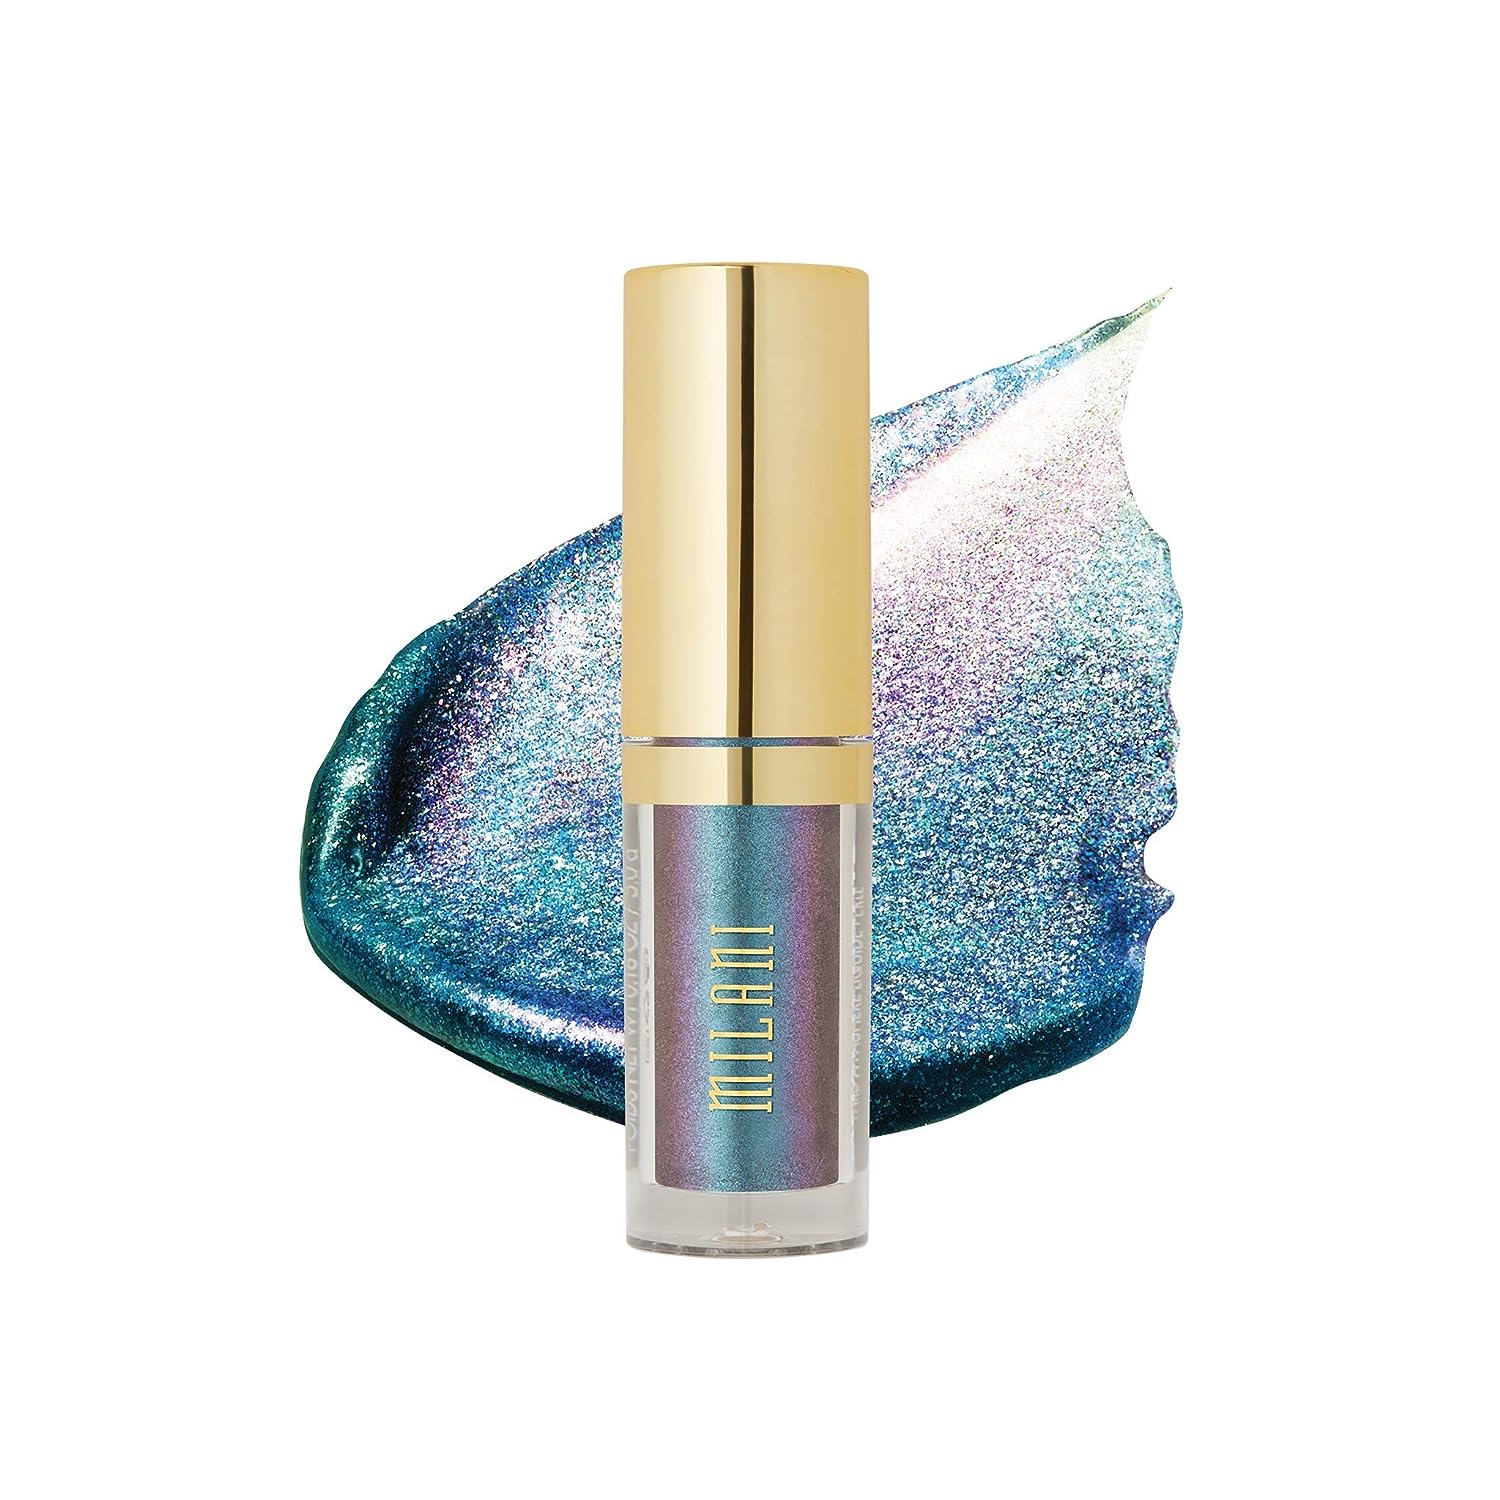 Milani Hypnotic Lights Eye Topper - Prismatic Light (0.18 ) Cruelty-Free Eye Topping Glitter with a Shimmering Finish